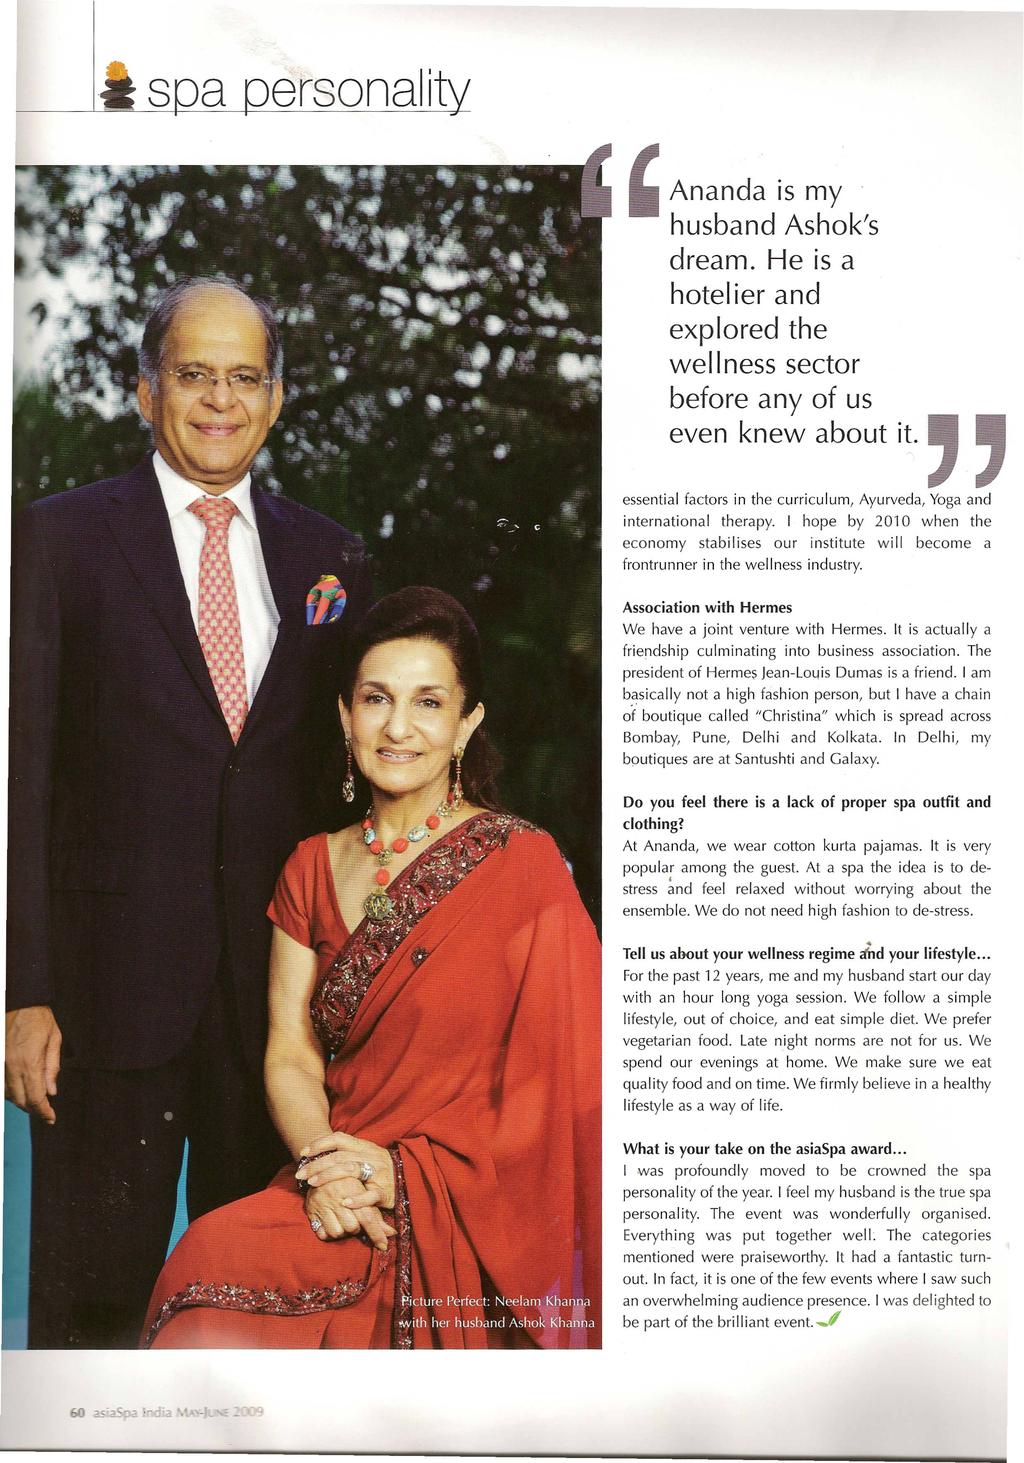 ersonalit,ananda is my husband Ashok's dream. He is a hotel ier and explored the wellness sector before any of us even knew about it.